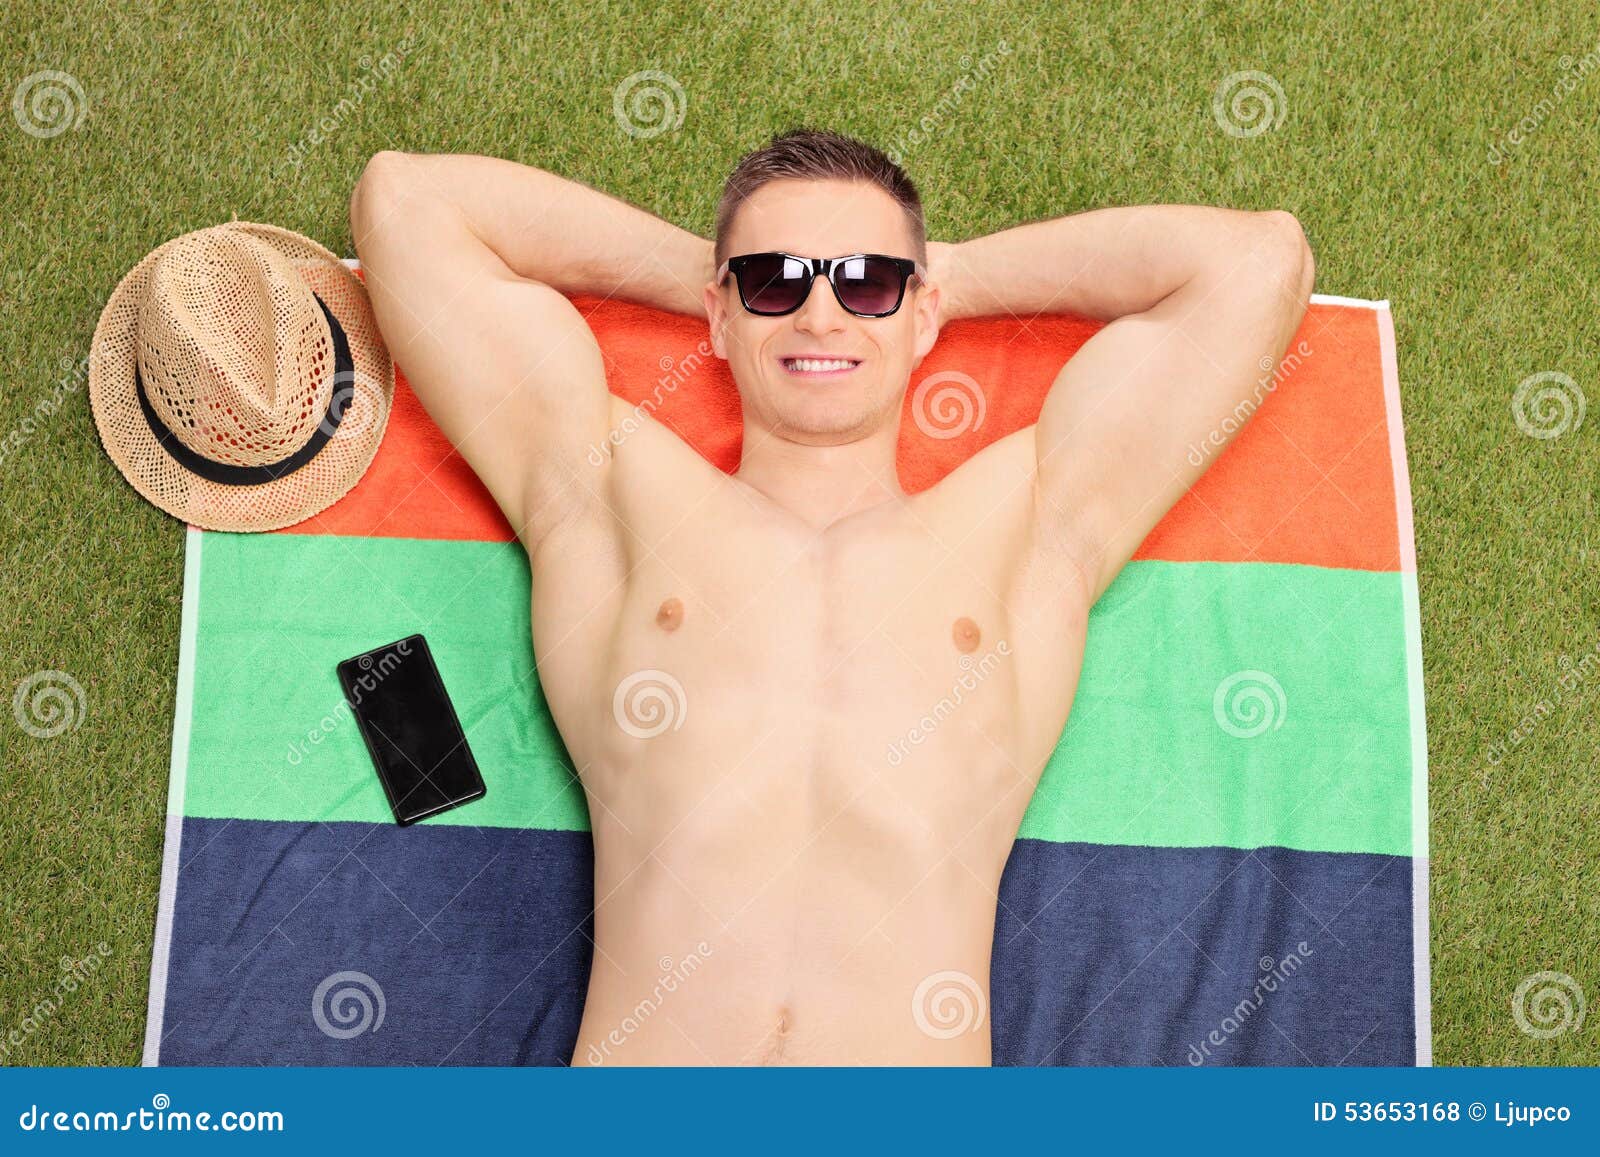 185 Backyard Tanning Photos Free Royalty Free Stock Photos From Dreamstime